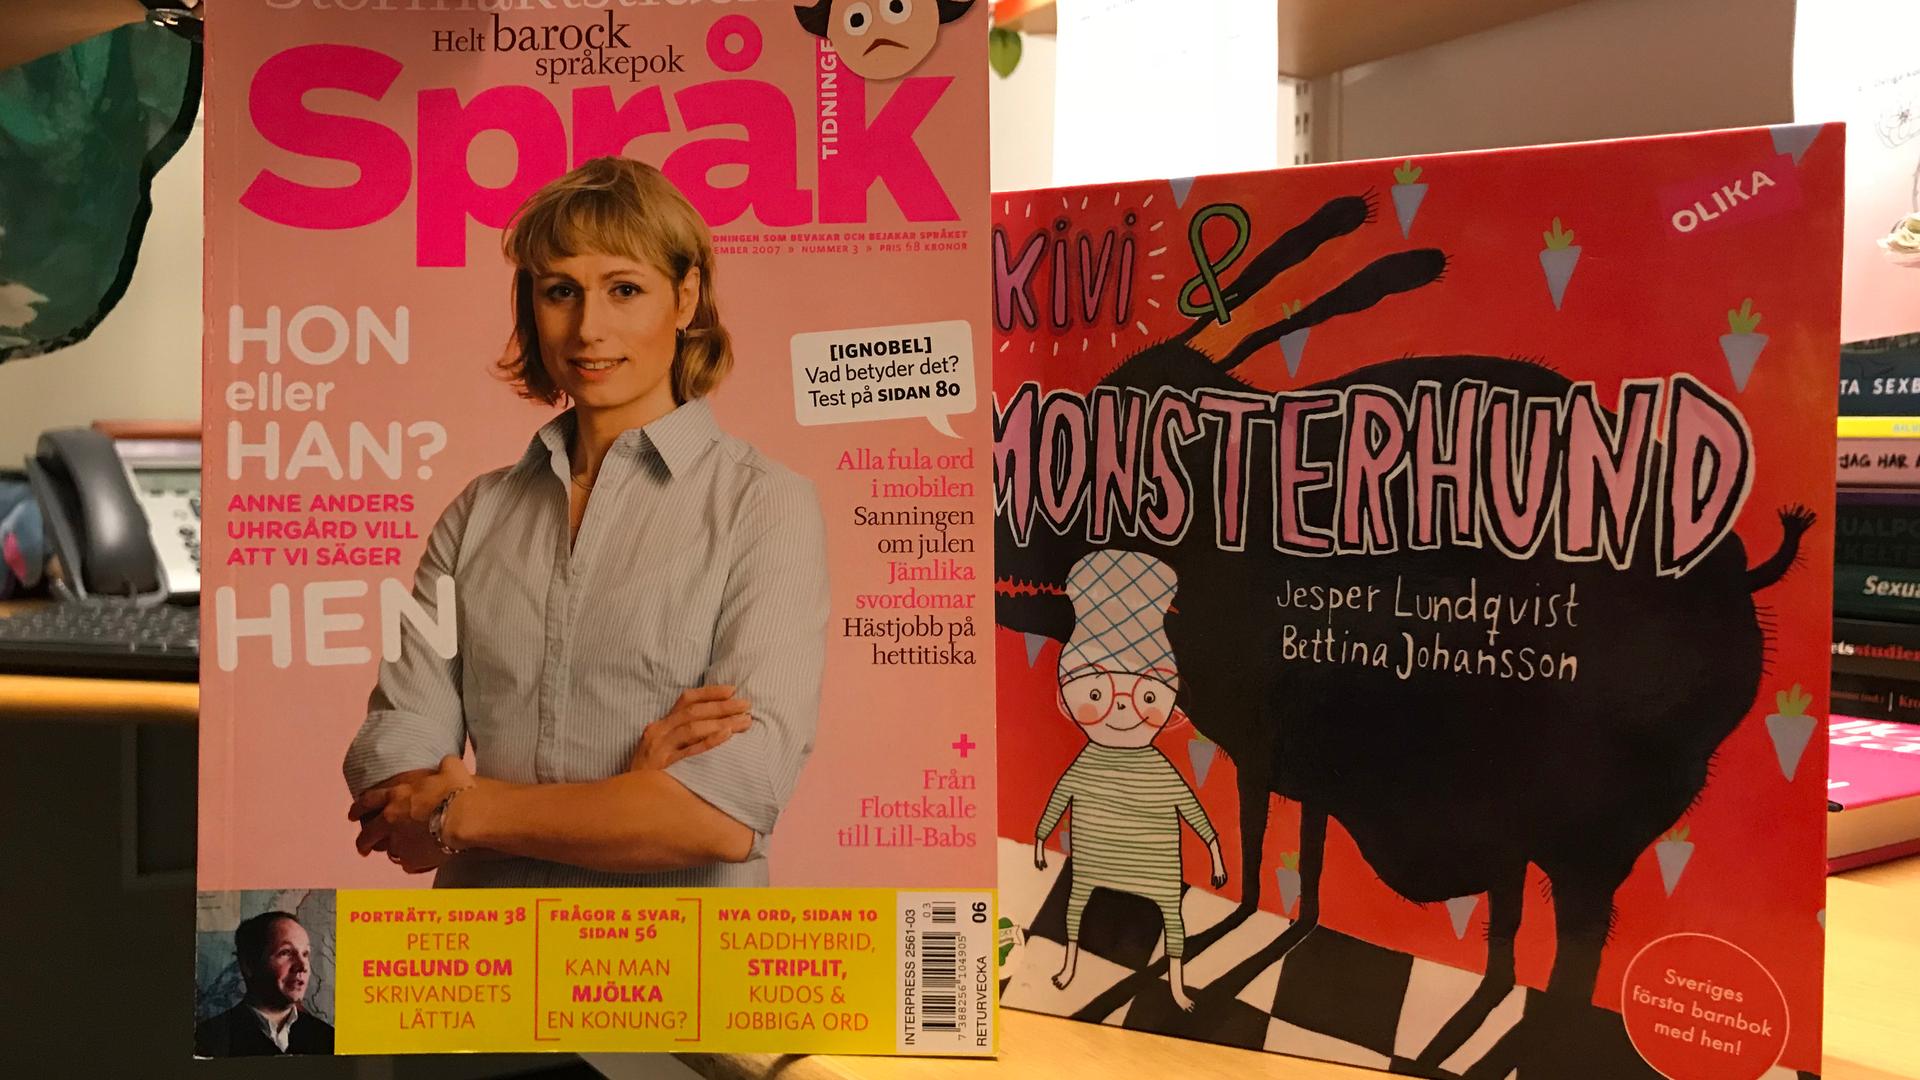 In 2007 Språk Magazine published an article about "hen" that raised the profile of the word. In 2012, the children's book, "Kivi & Monsterhund" was published sparking a nationwide debate about "hen"